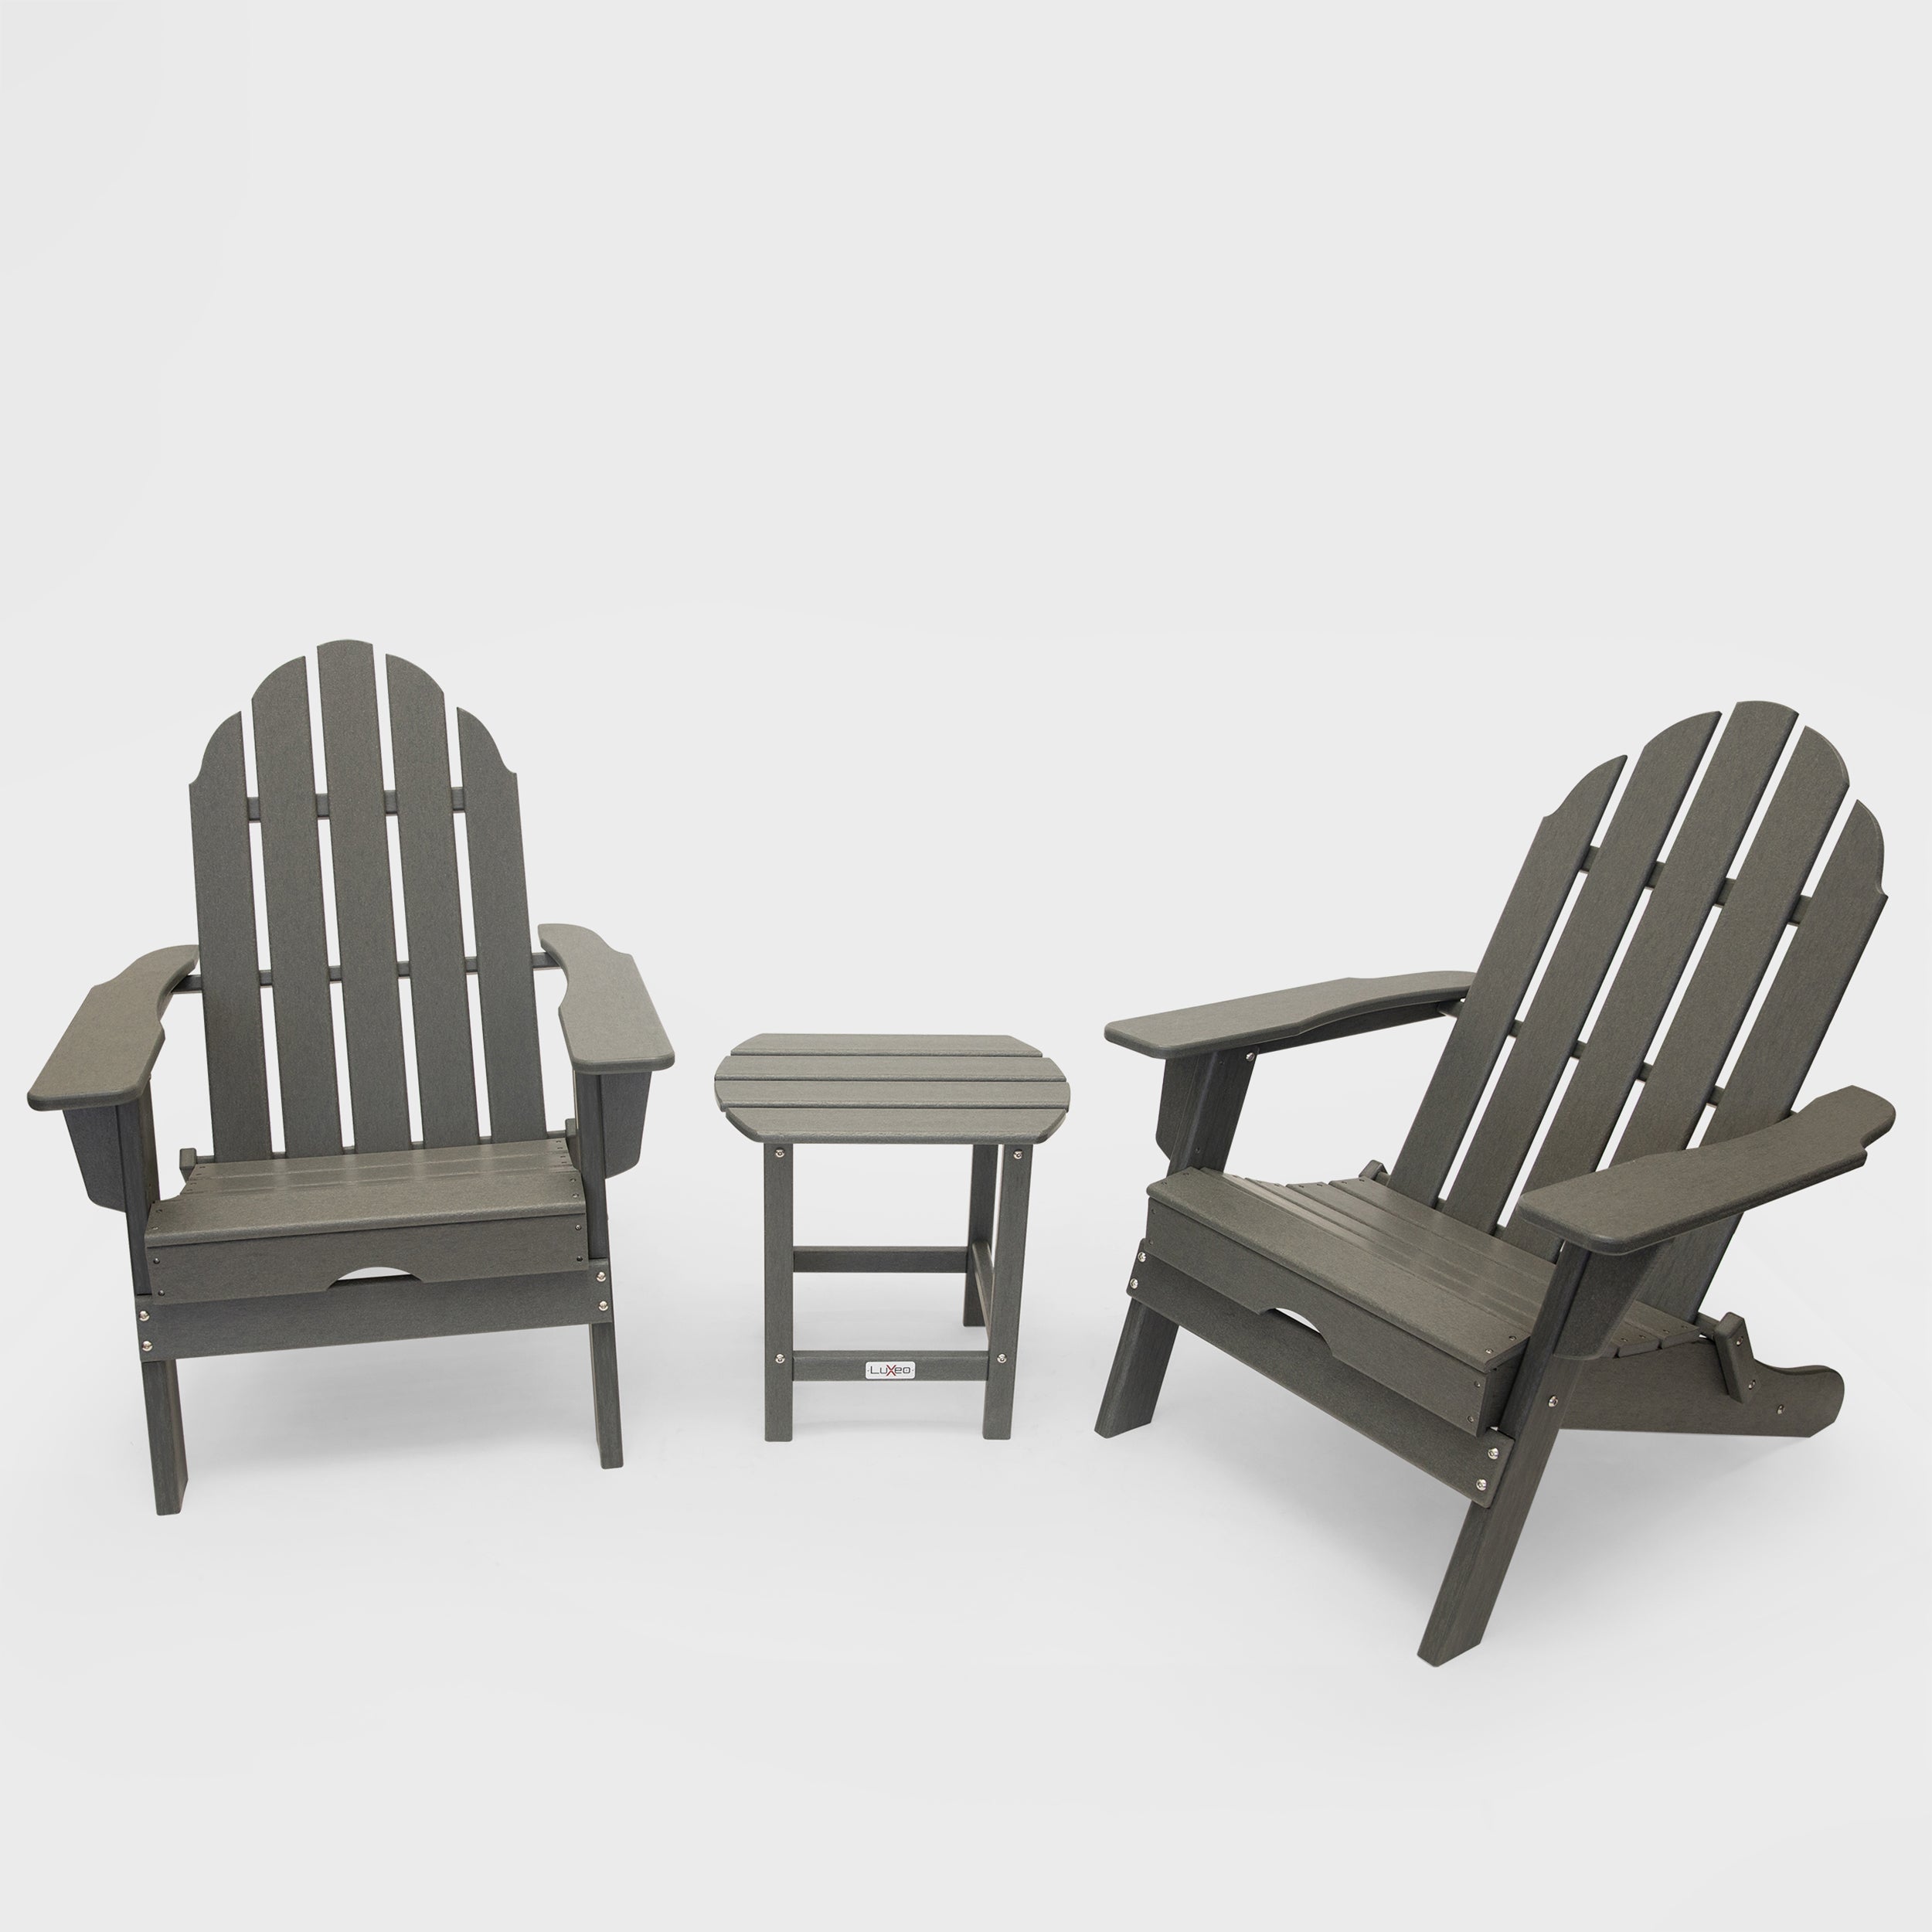 LuXeo Balboa HDPE Recycled Plastic Folding Adirondack Chair and Table Set (3-Piece)